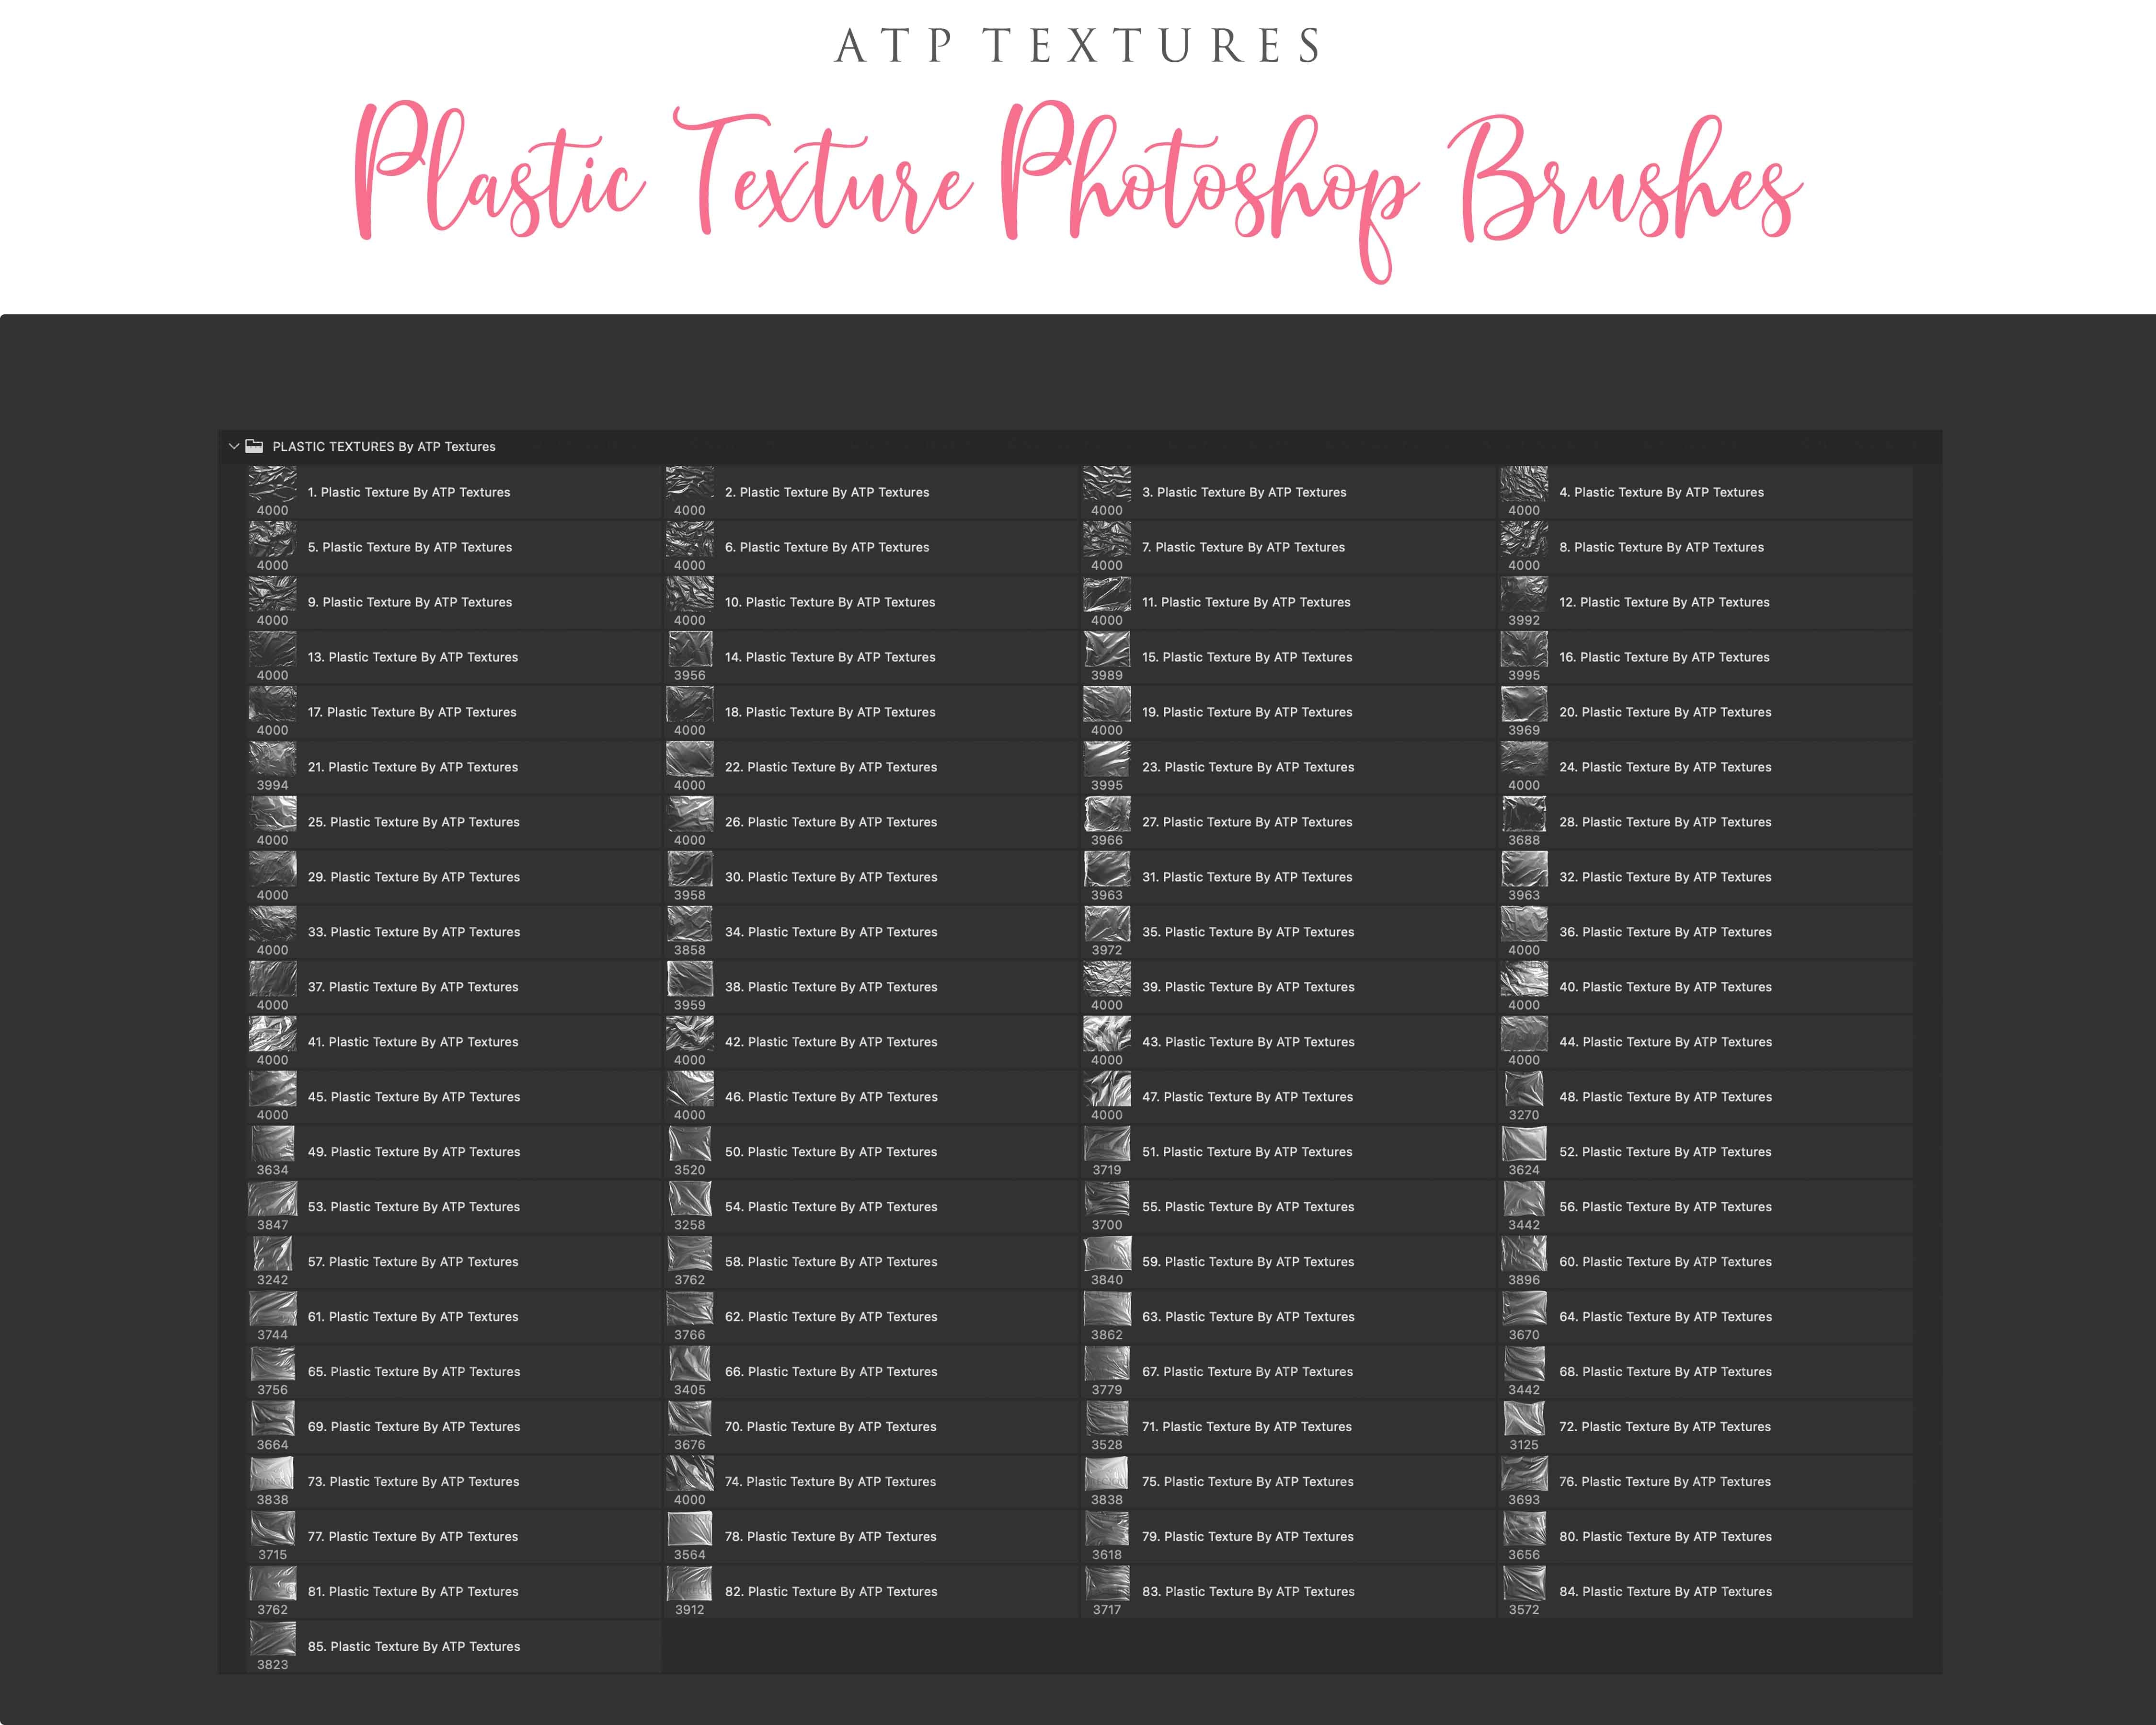 This set of Overlays & Photoshop Brushes includes JPEG Plastic Textures all different and unique with photoshop brushes. All JPEG overlays are 300dpi in high resolution. THEY ARE SUITABLE FOR FINE ART PRINTING. Digital assets for graphic art and photography.